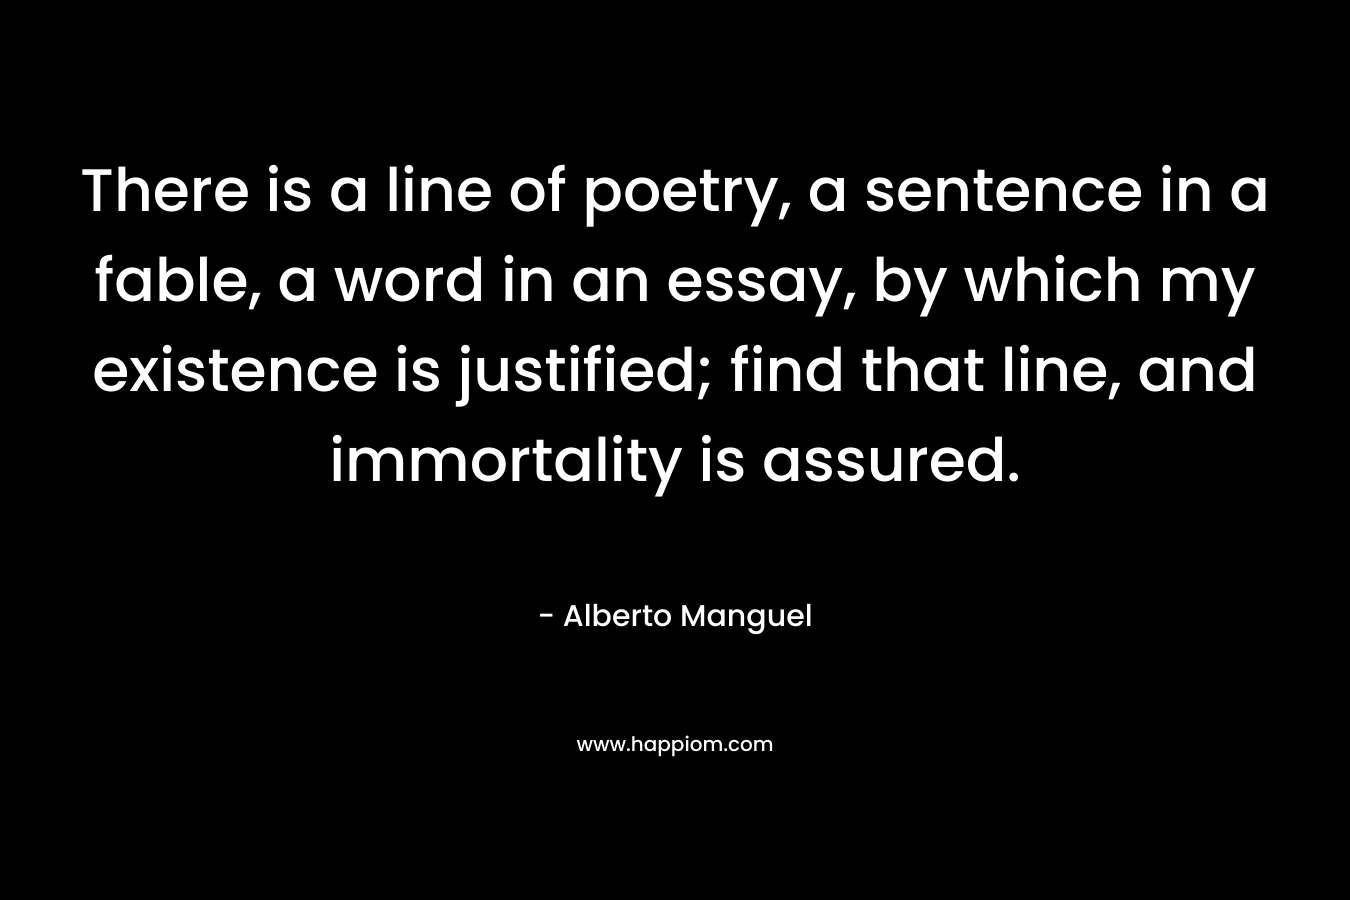 There is a line of poetry, a sentence in a fable, a word in an essay, by which my existence is justified; find that line, and immortality is assured.